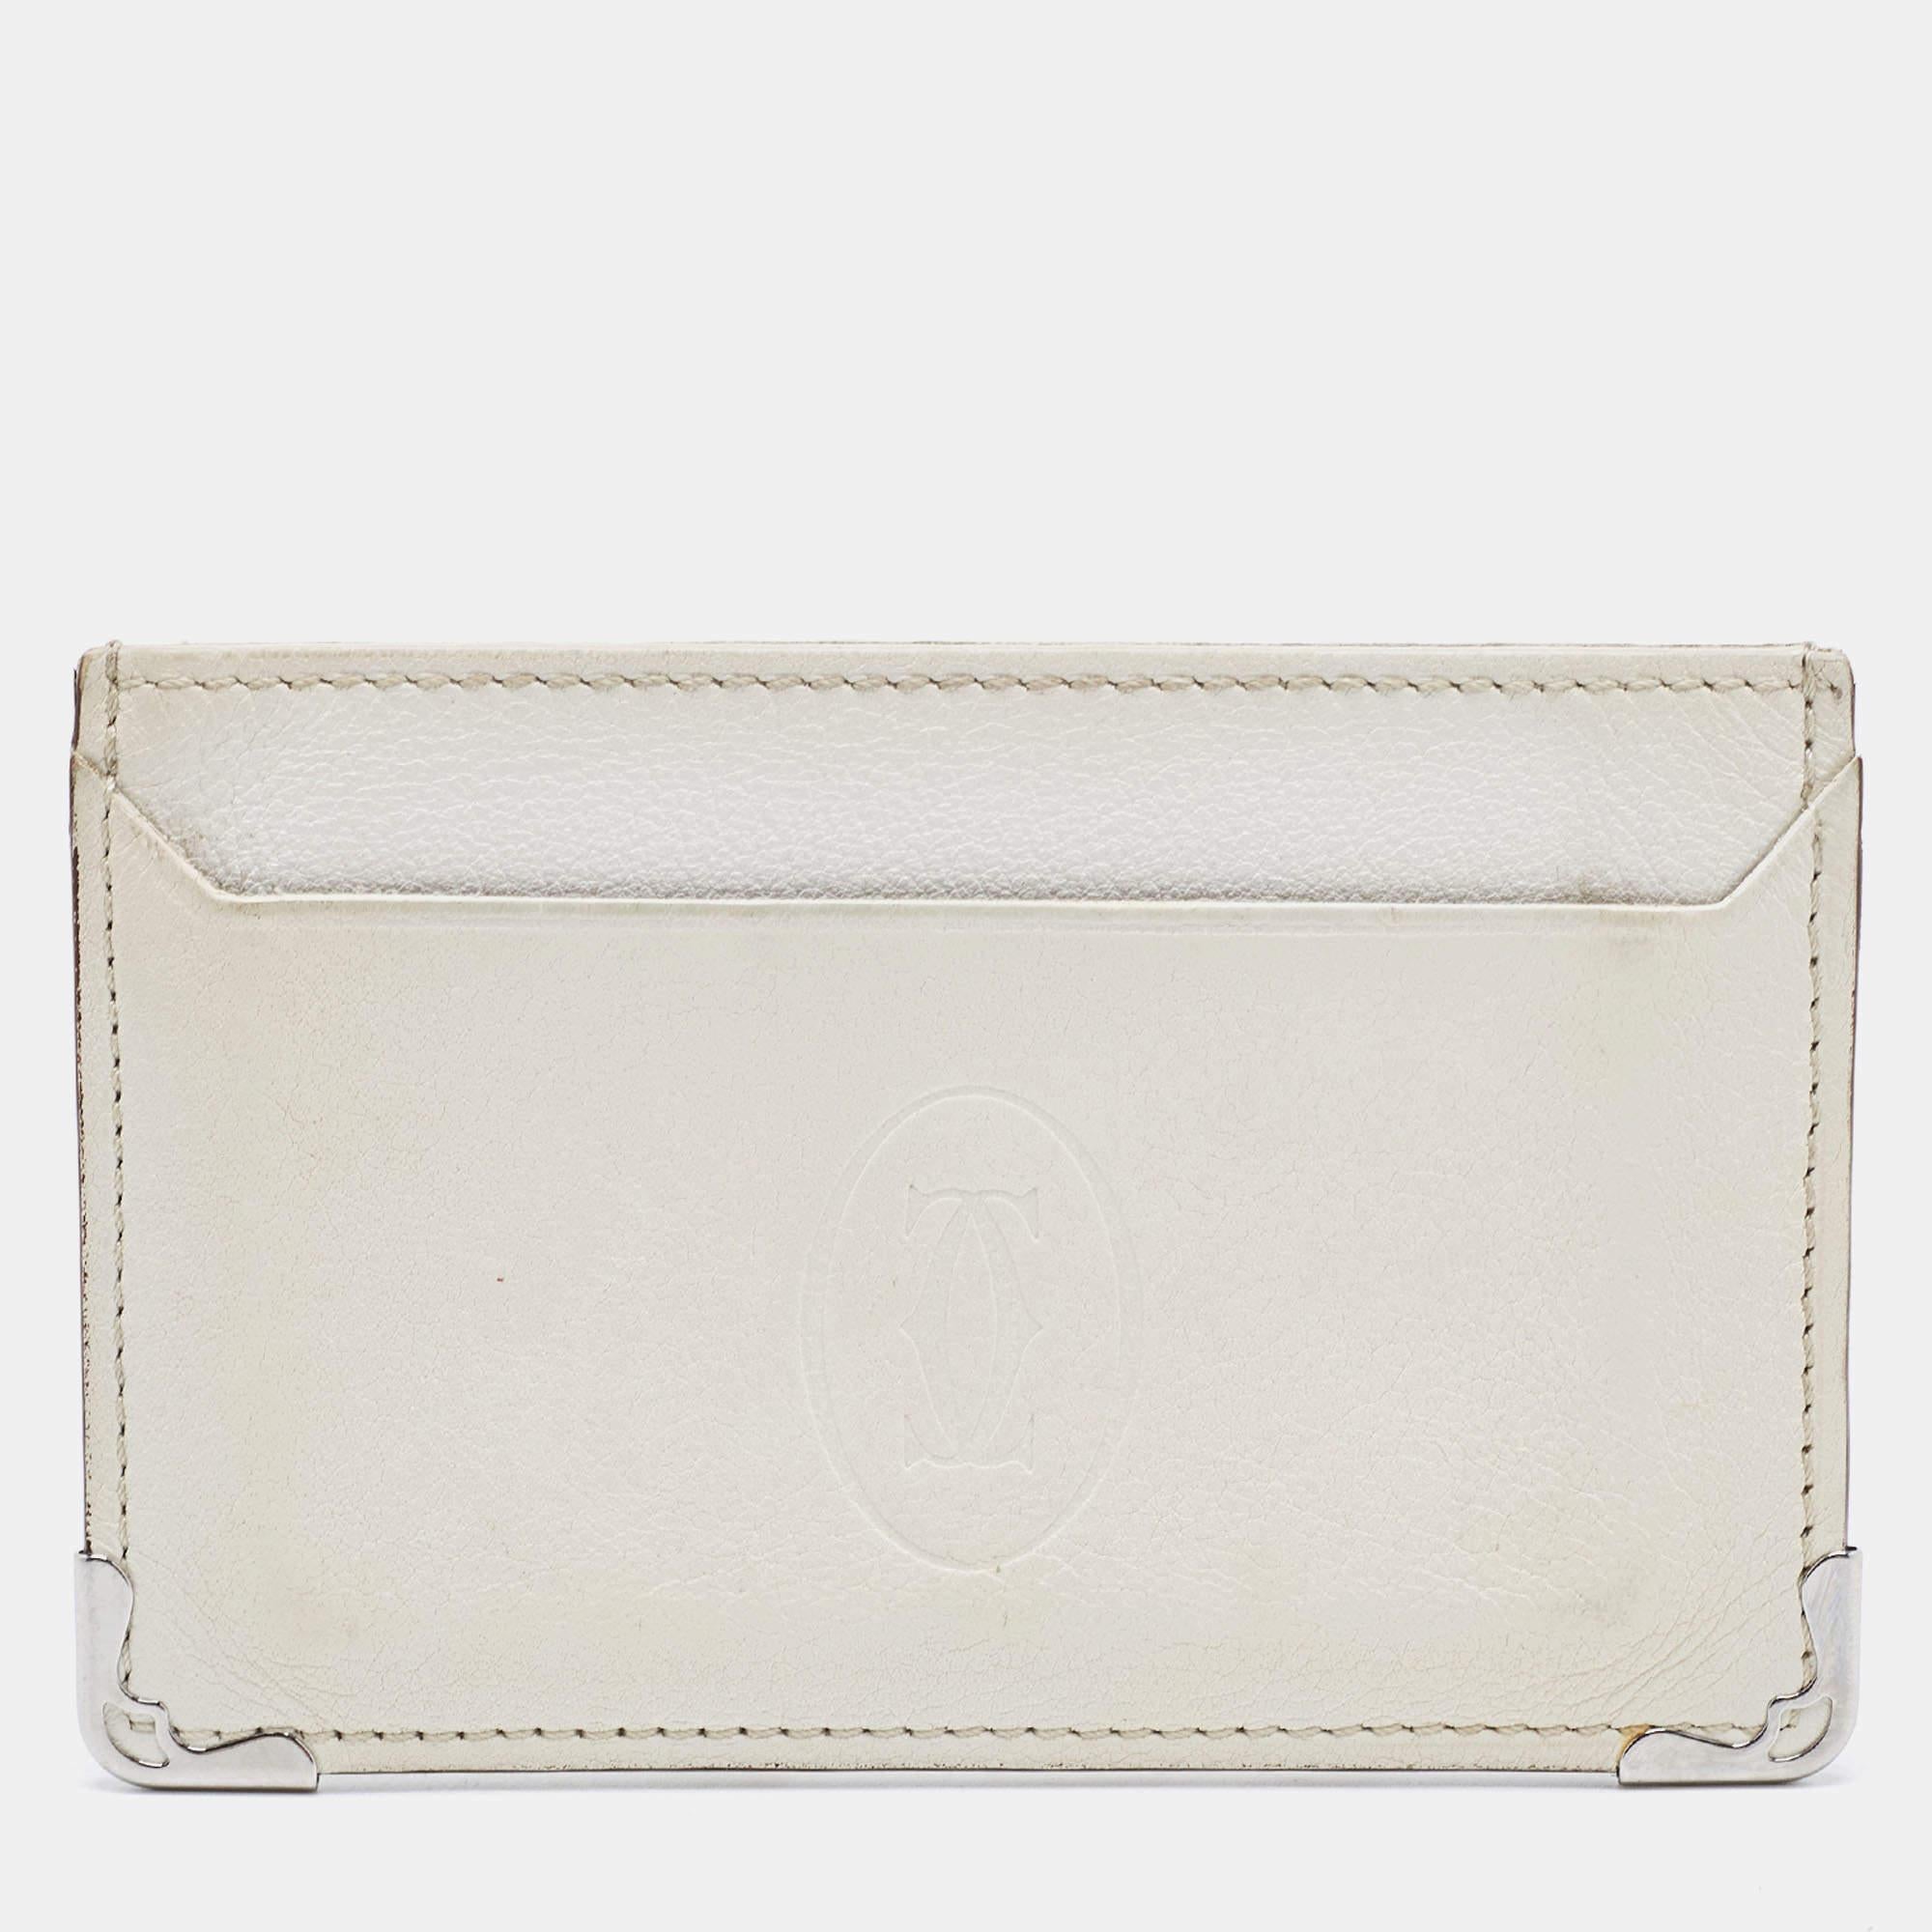 Complete your collection of accessories with this stunning Cartier creation. Crafted from leather in a timeless white hue, the cardholder is styled with multiple slots.

